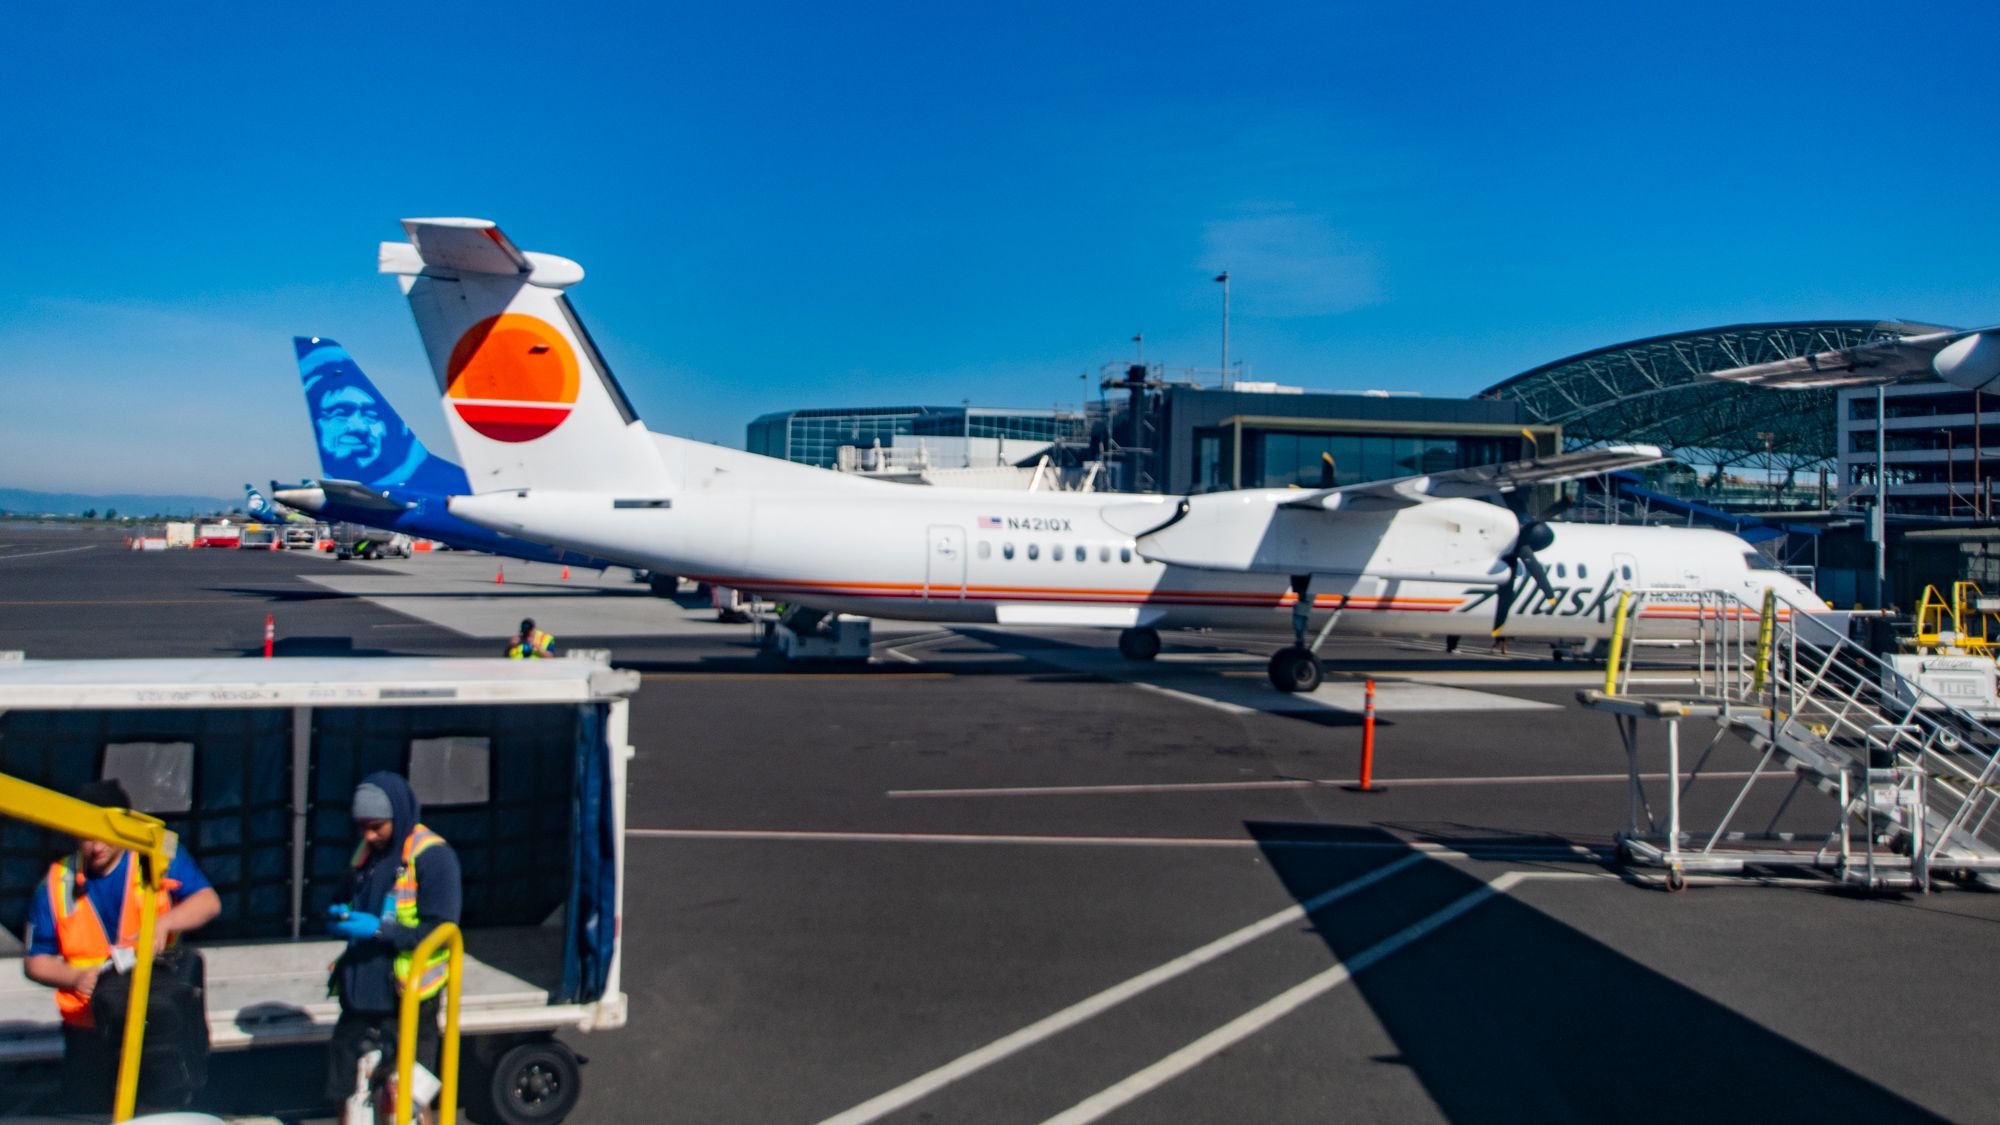 Looking Back at PDX Concourse B With Horizon Q400 and ERJ-175 at Gates